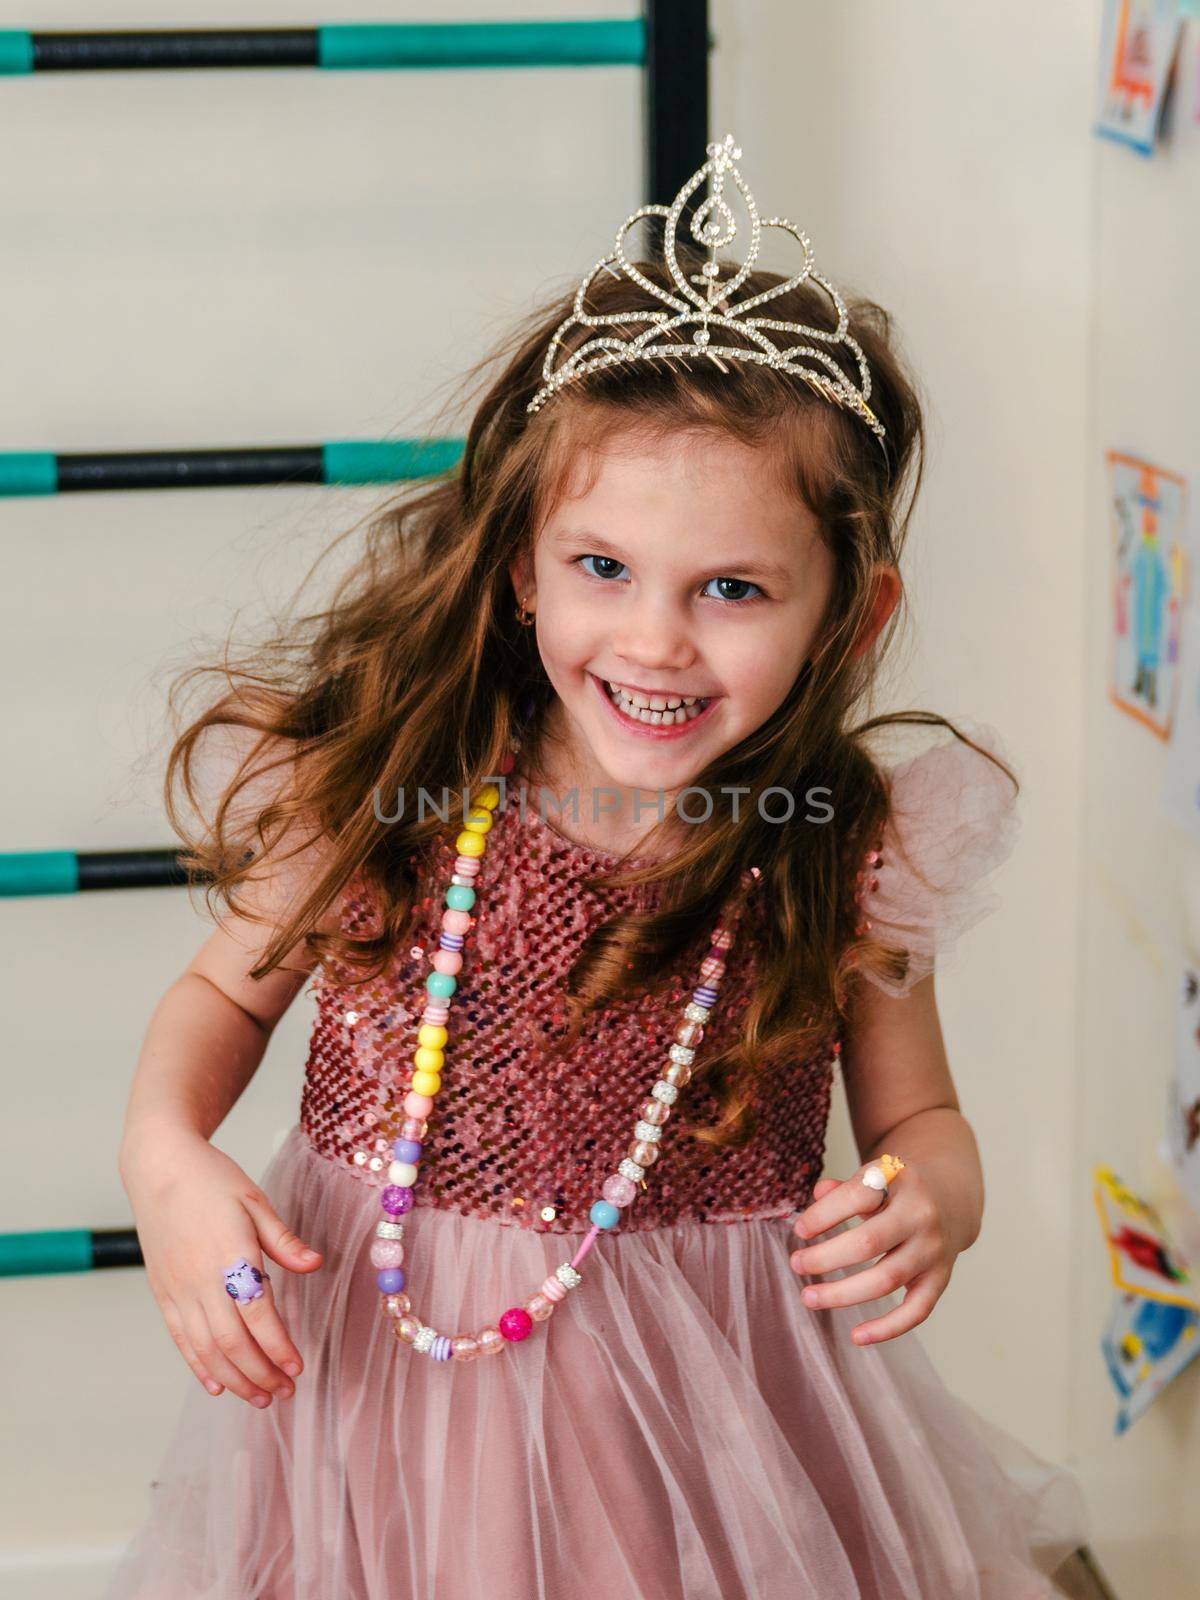 a little girl in a beautiful dress and crown plays and runs around the house, close-up.